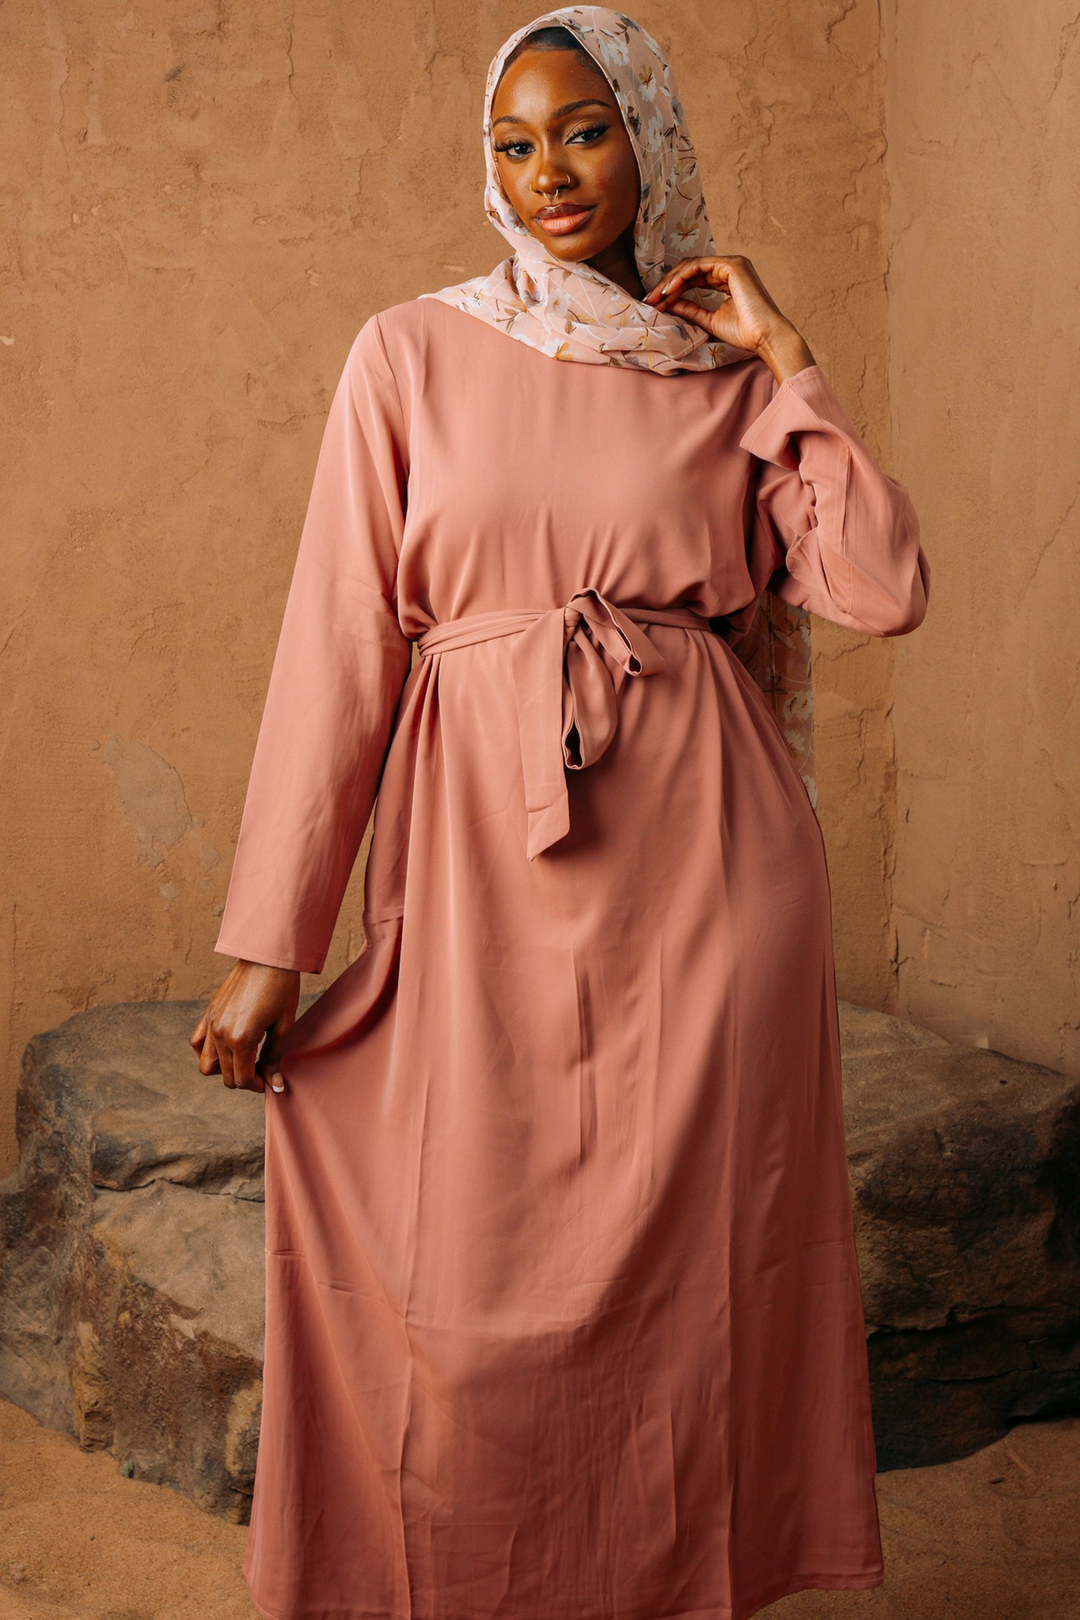 a woman in a pink dress poses for a picture